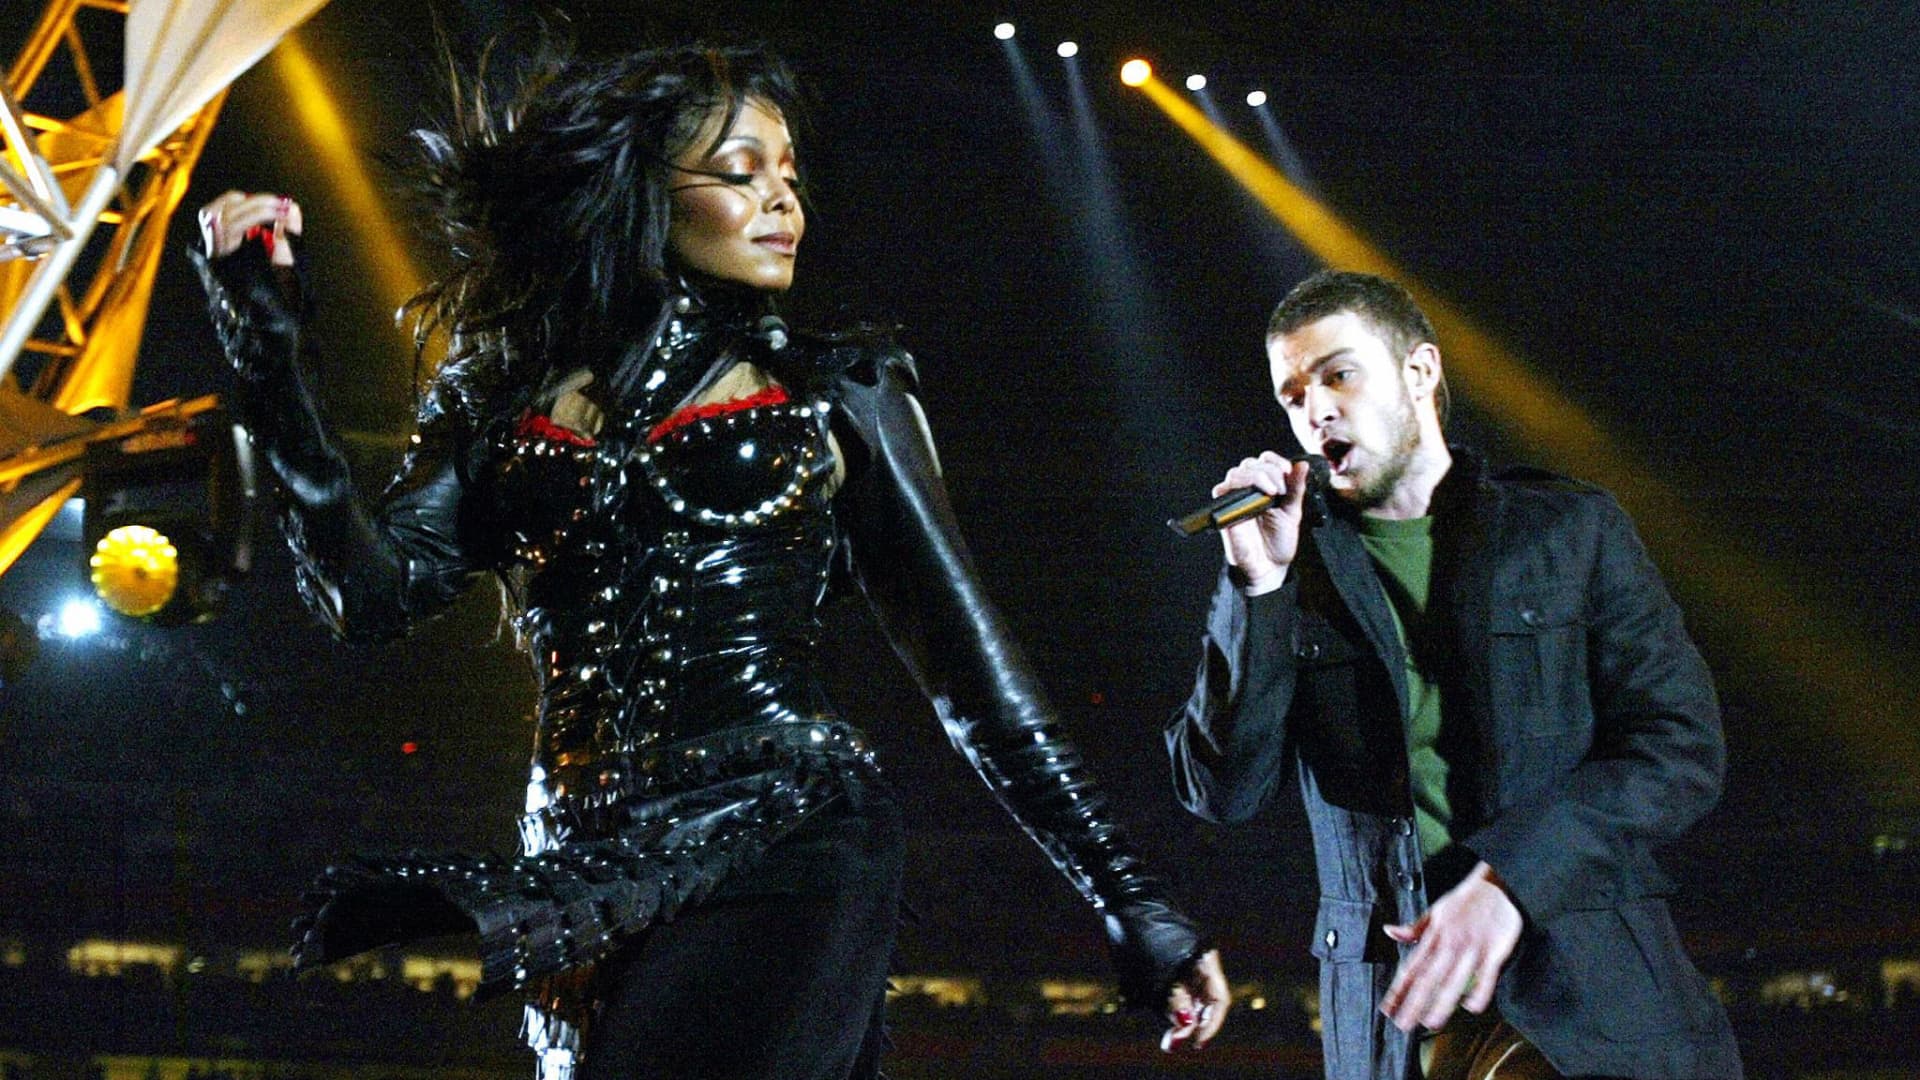 Janet Jackson and Justin Timberlake perform at half-time at Super Bowl XXXVIII at Reliant Stadium, 01 February 2004 in Houston.